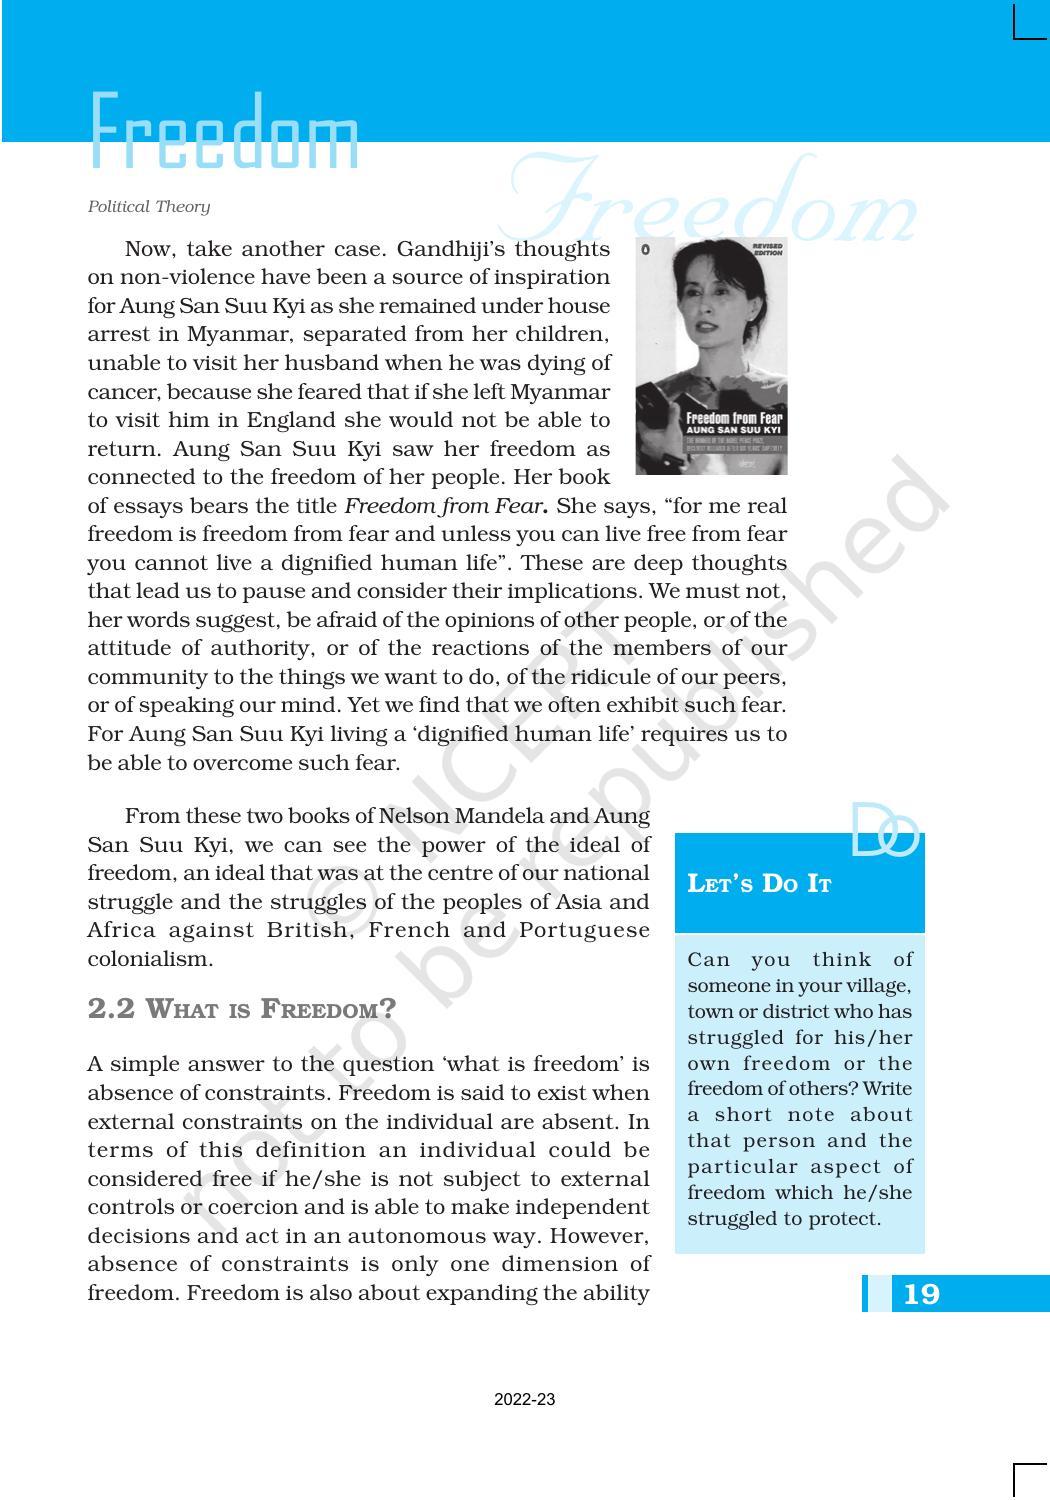 NCERT Book for Class 11 Political Science (Political Theory) Chapter 2 Freedom - Page 3